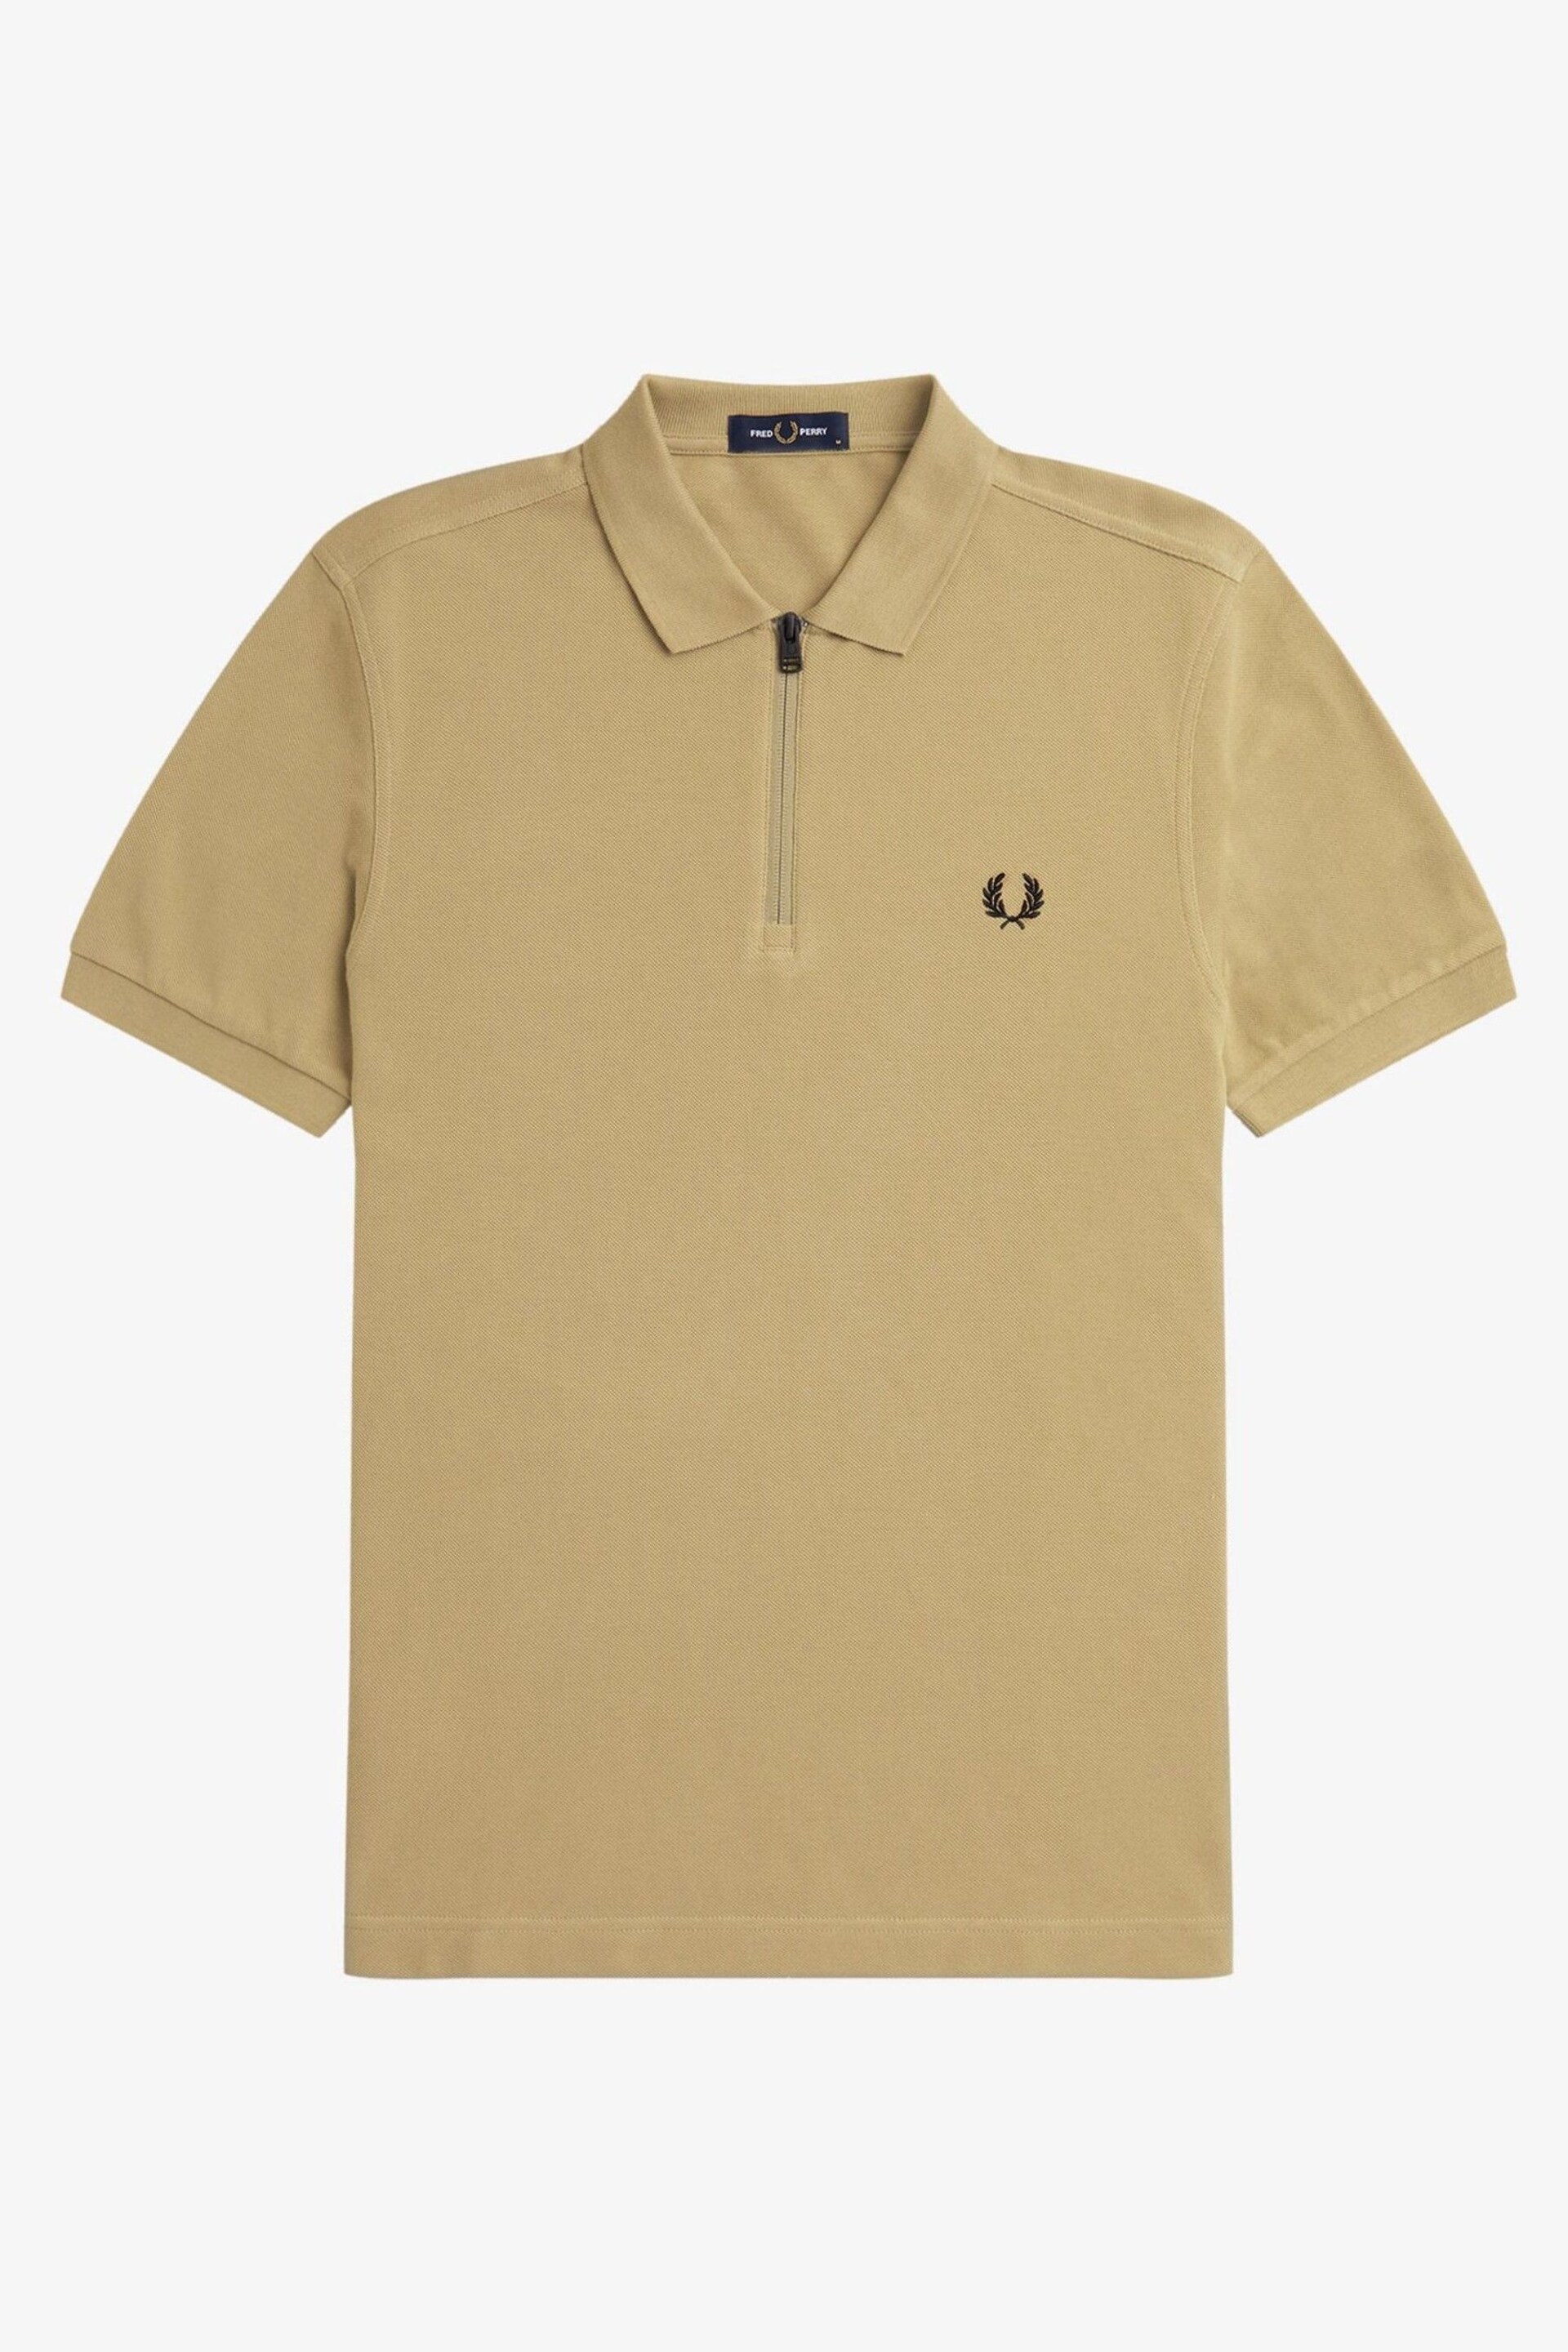 Fred Perry Stone Zip Neck Polo Shirt - Image 4 of 5